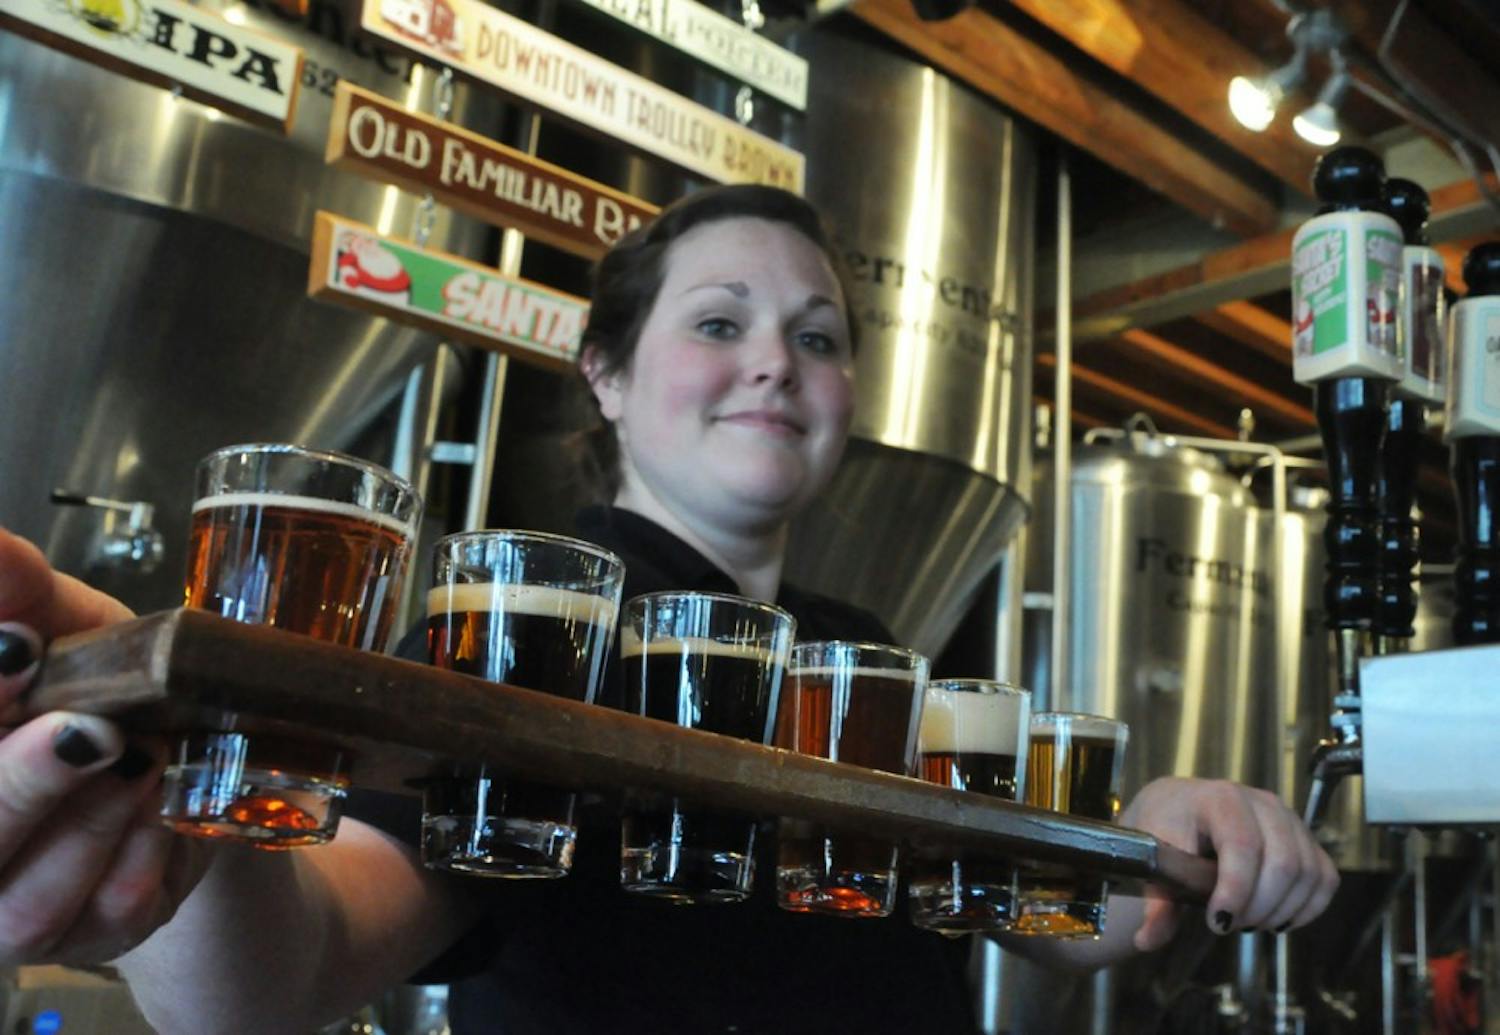 Leanna Tyndall, 23, holds Carolina Brewery’s sampler paddle on Thursday.  The Chapel Hill native has worked at the bar and restaurant on and off for the past six years.  The brewery has recently expanded their beer distribution to more areas across North Carolina.  